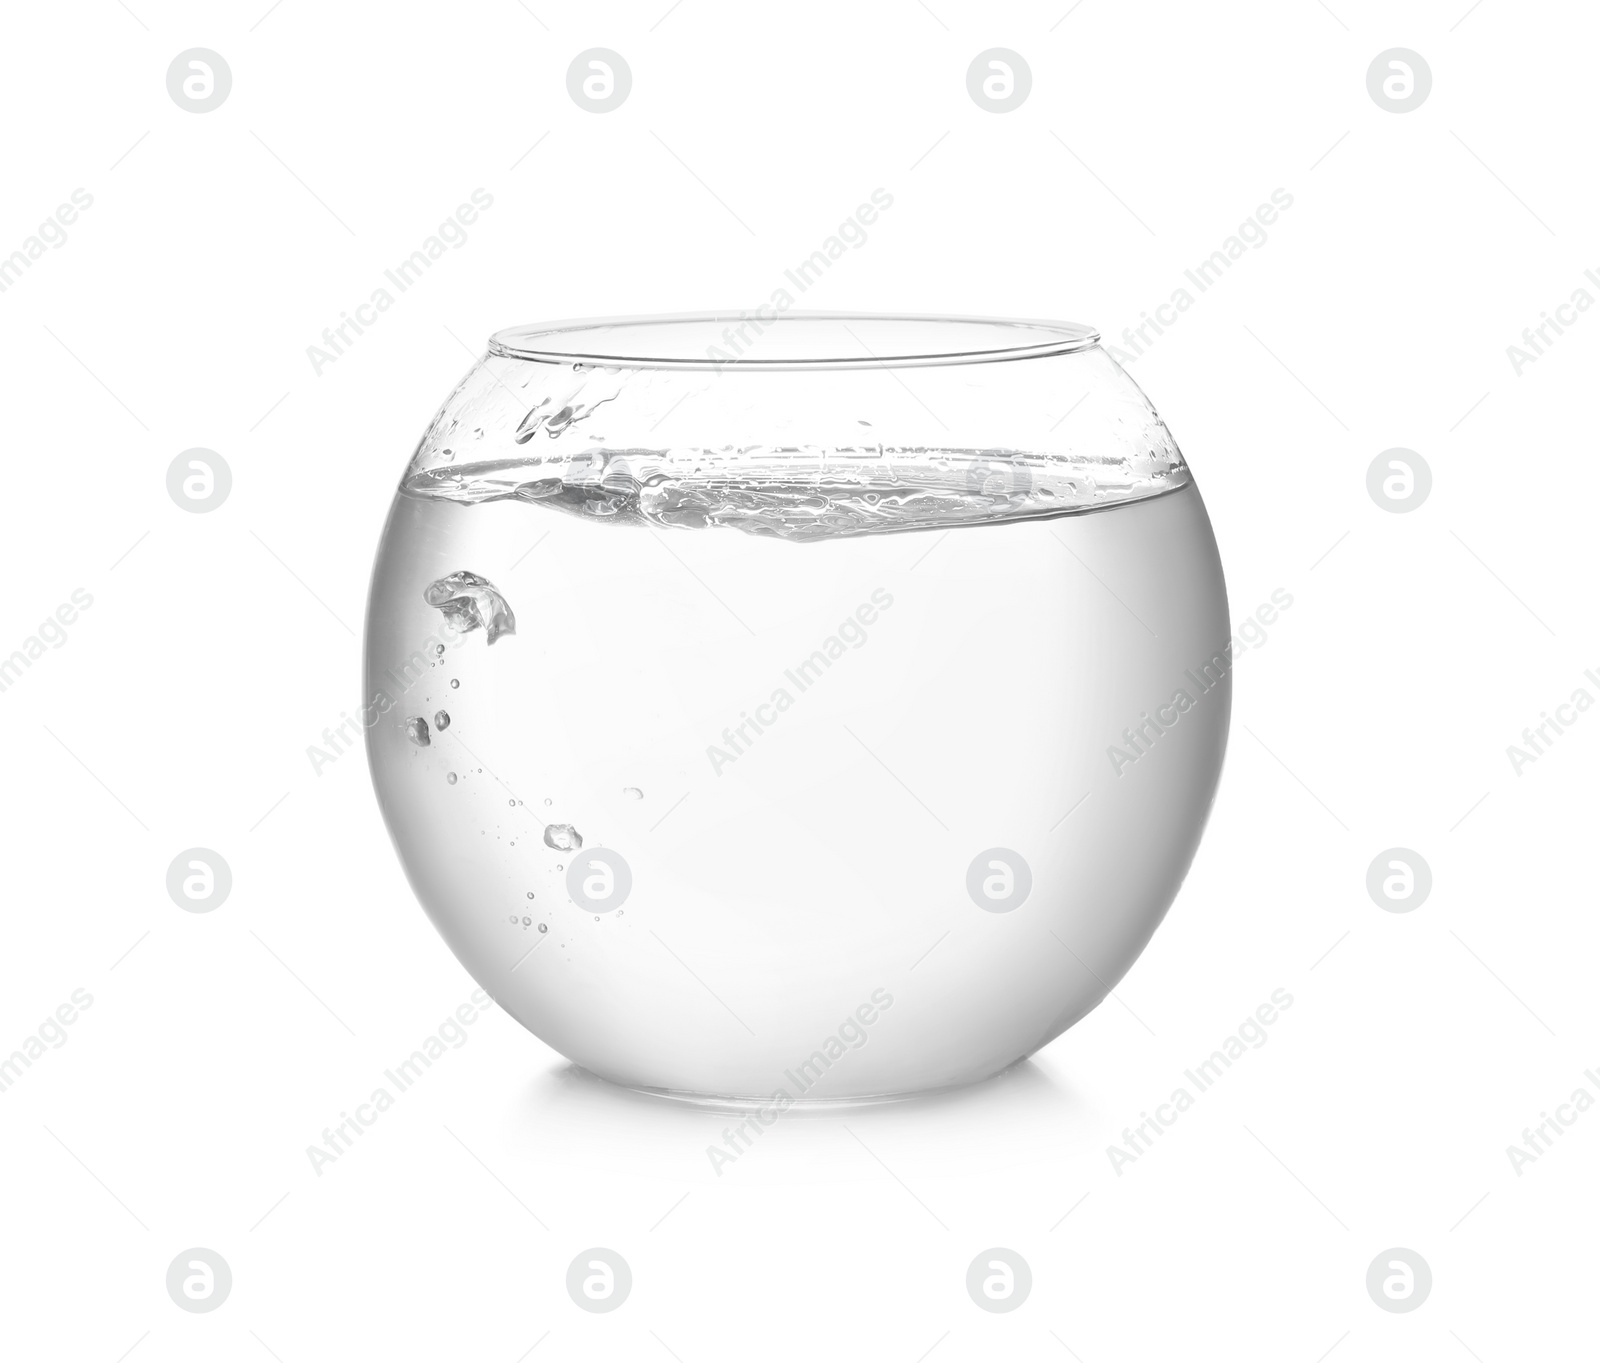 Photo of Round fish bowl filled with water on white background